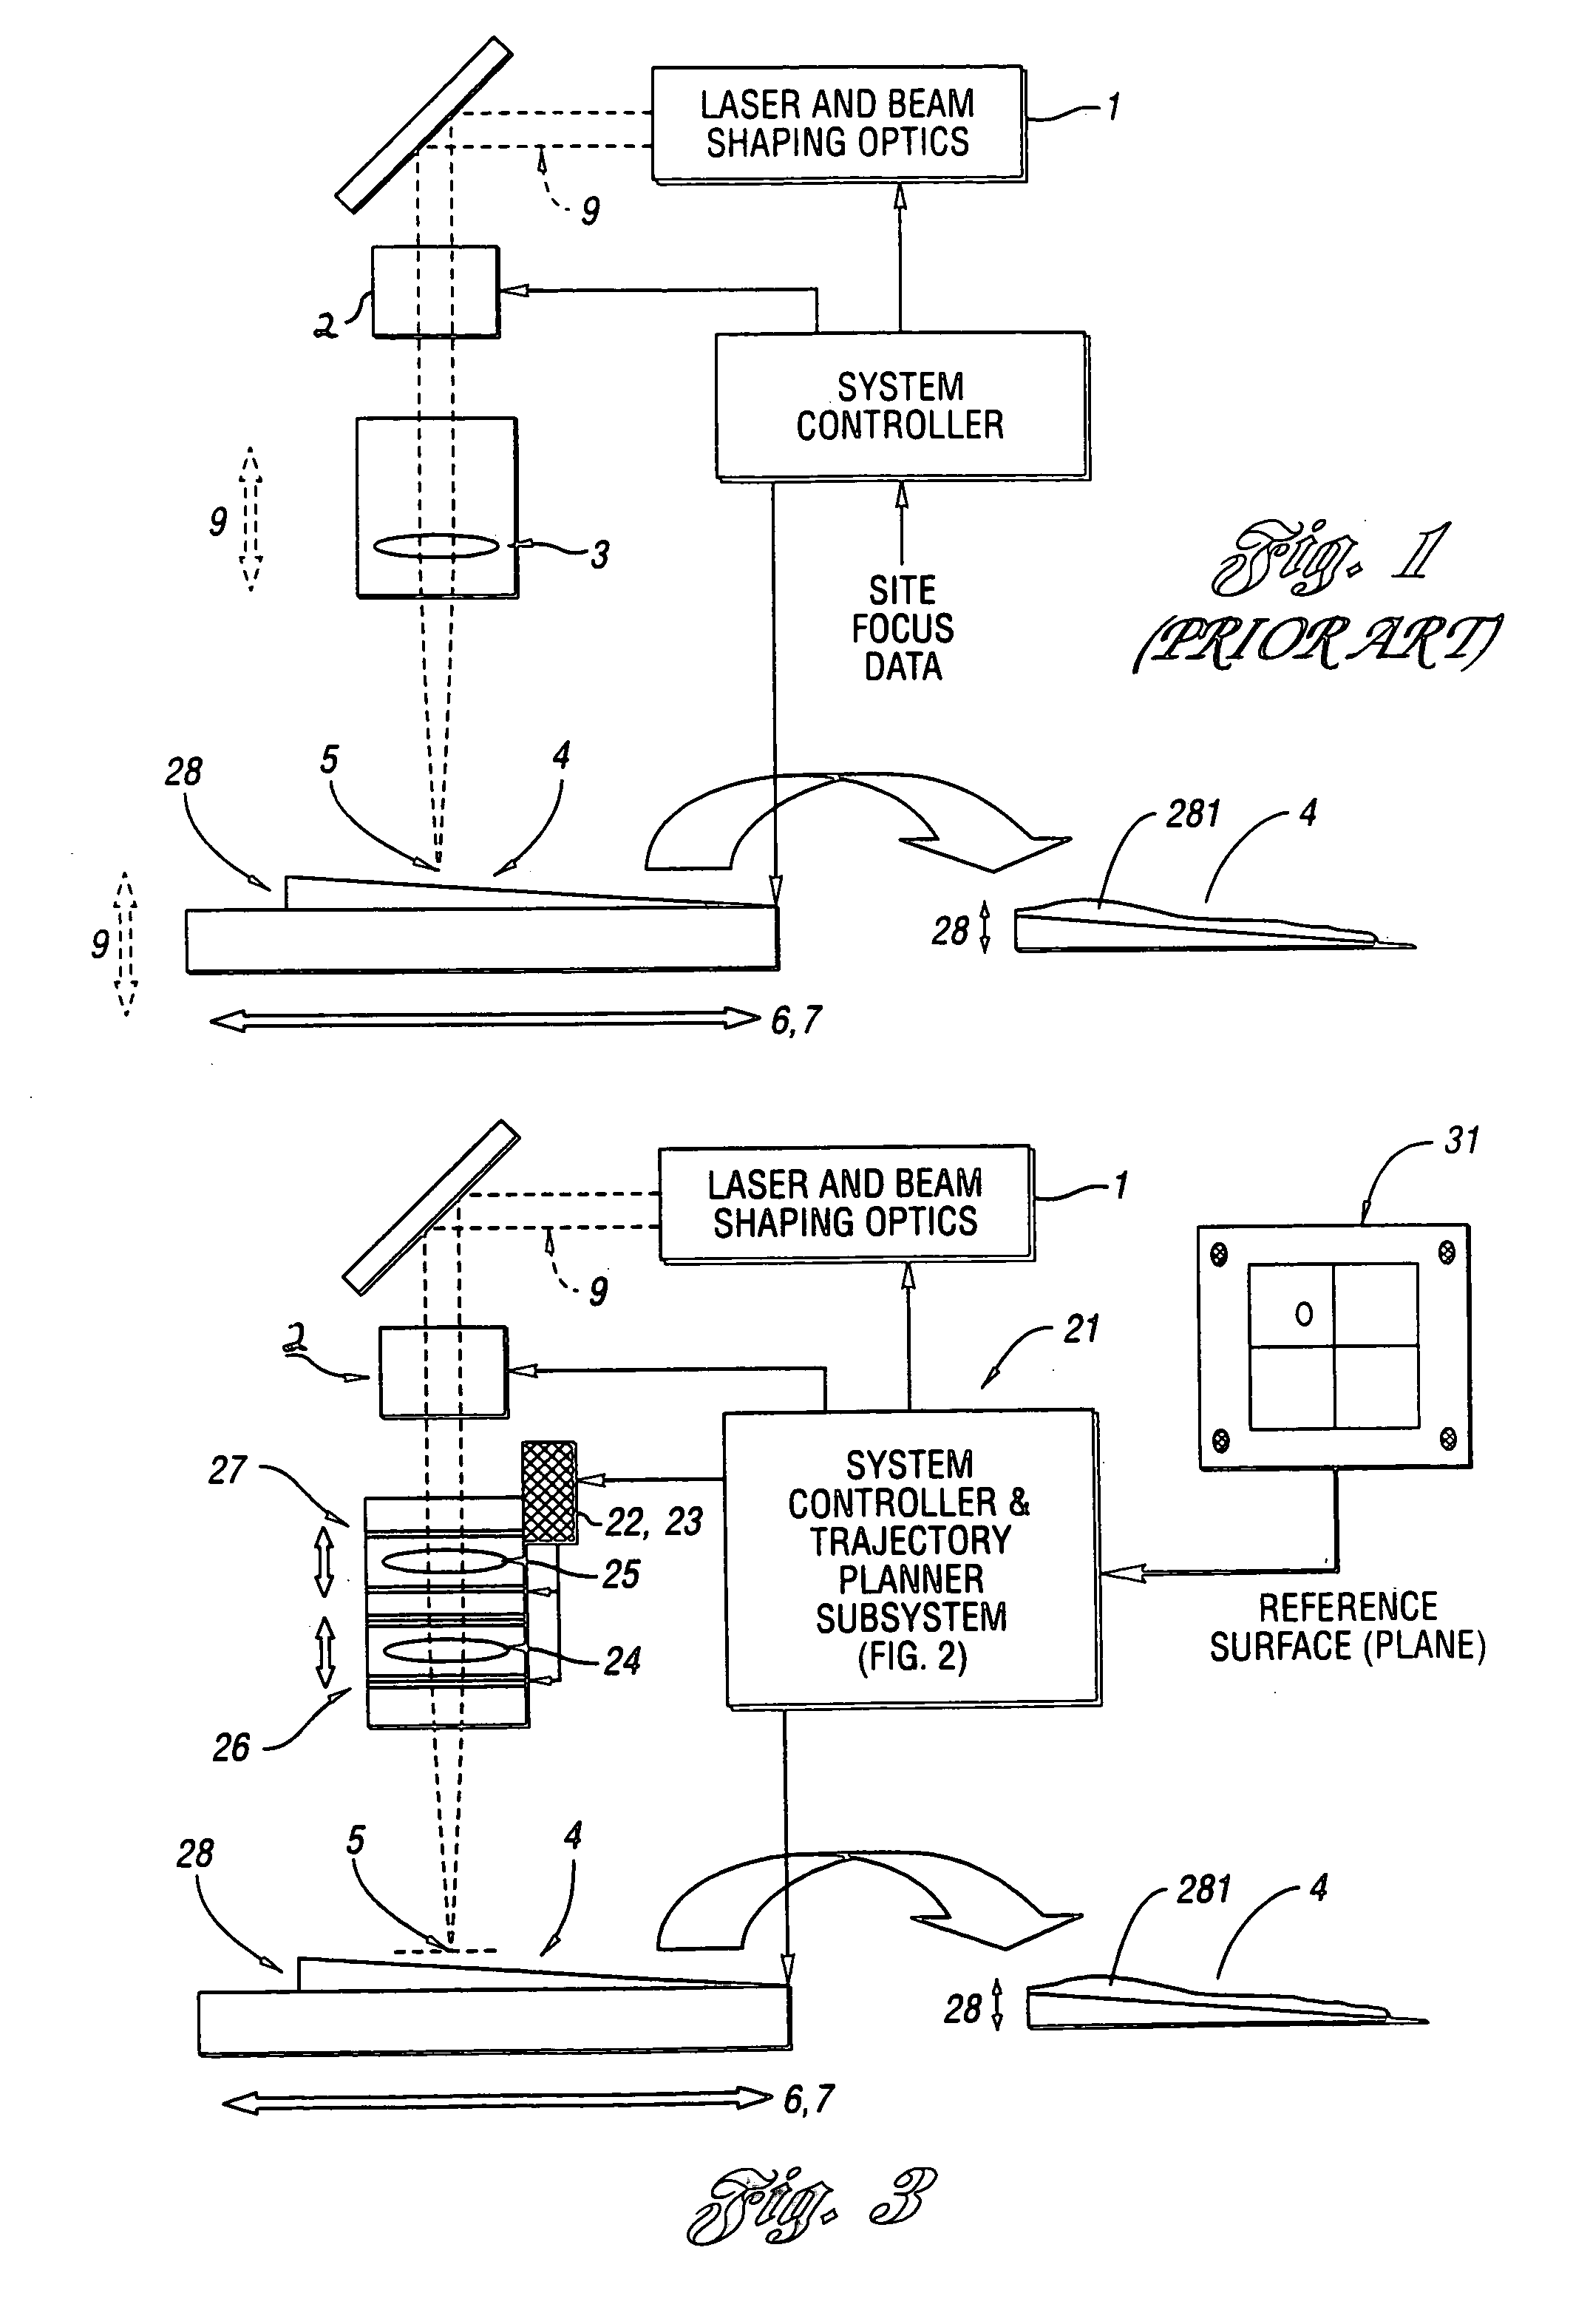 Method and system for precisely positioning a waist of a material-processing laser beam to process microstructures within a laser-processing site